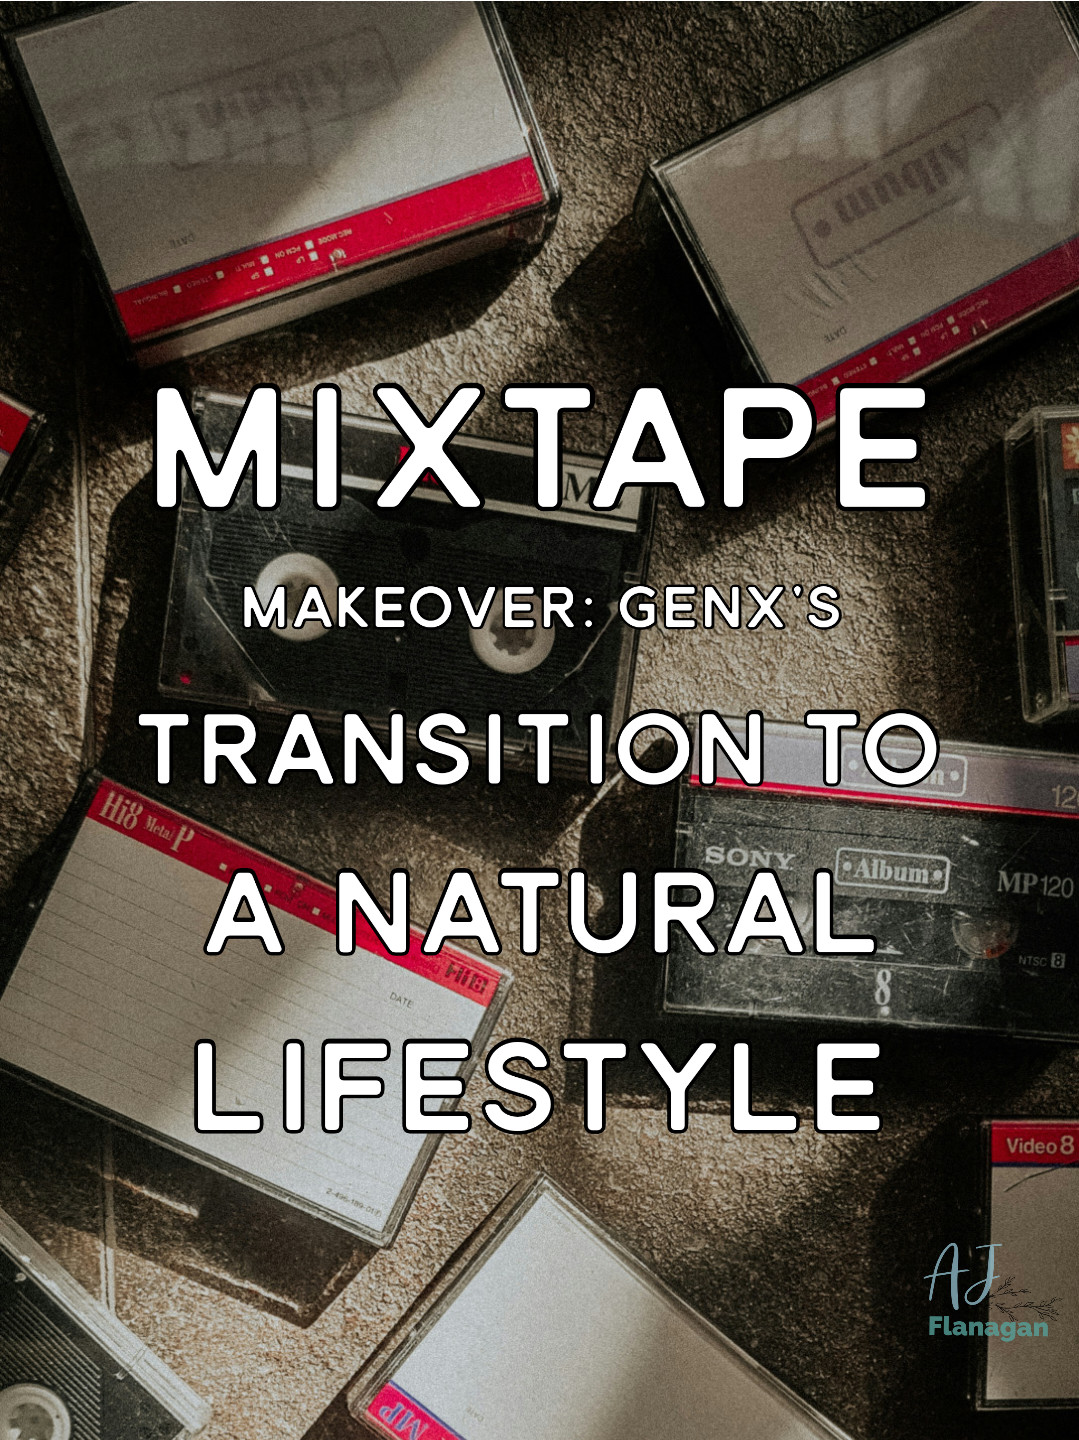 Mixtape Makeover: GenX's Transition to a Natural Lifestyle